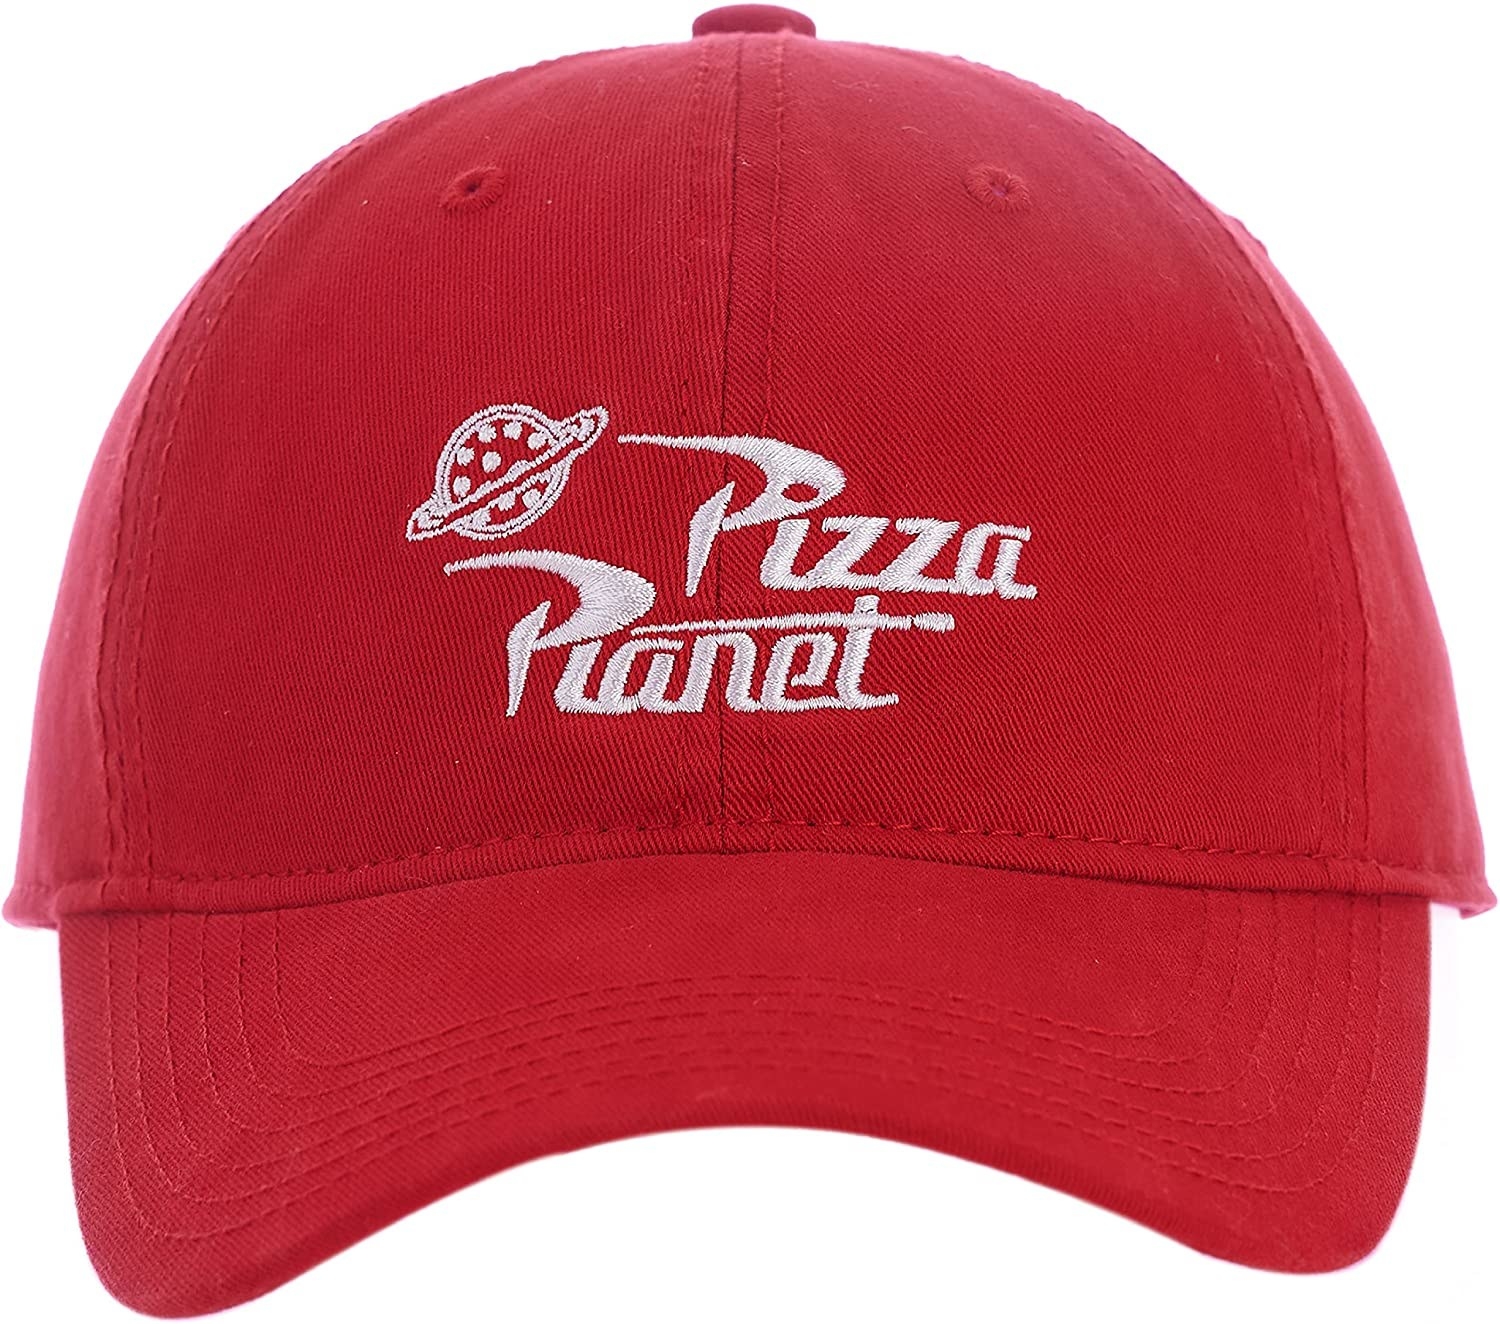 The red Pizza Planet baseball cap